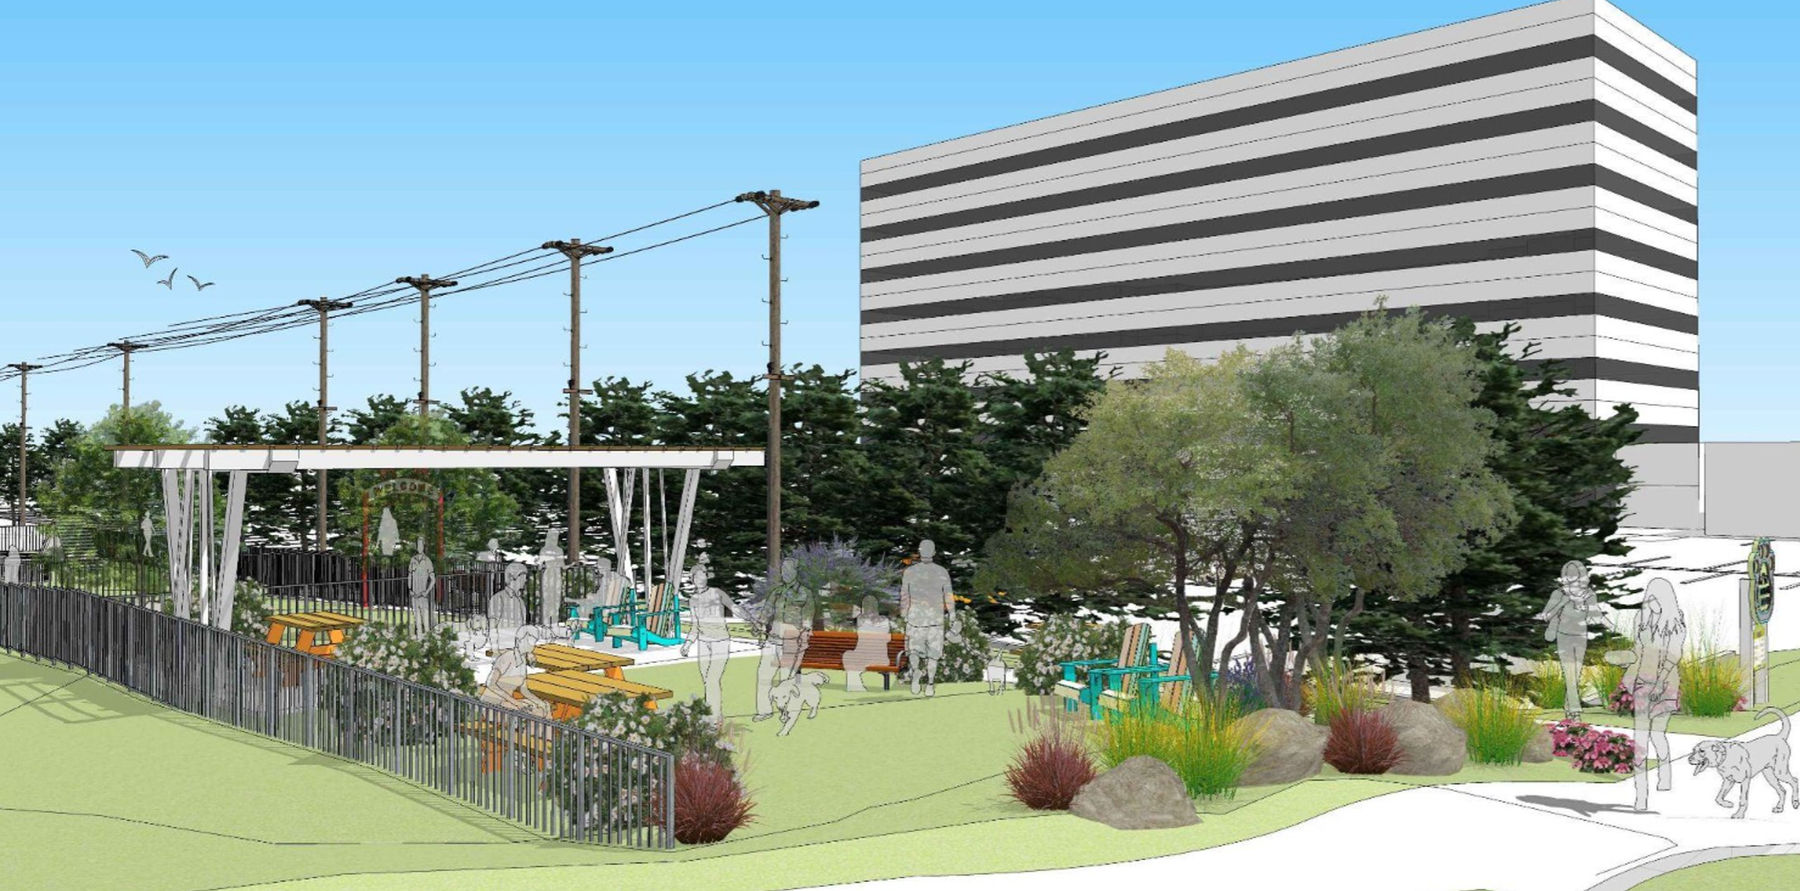 Rendering of the Downtown Doggie Depot